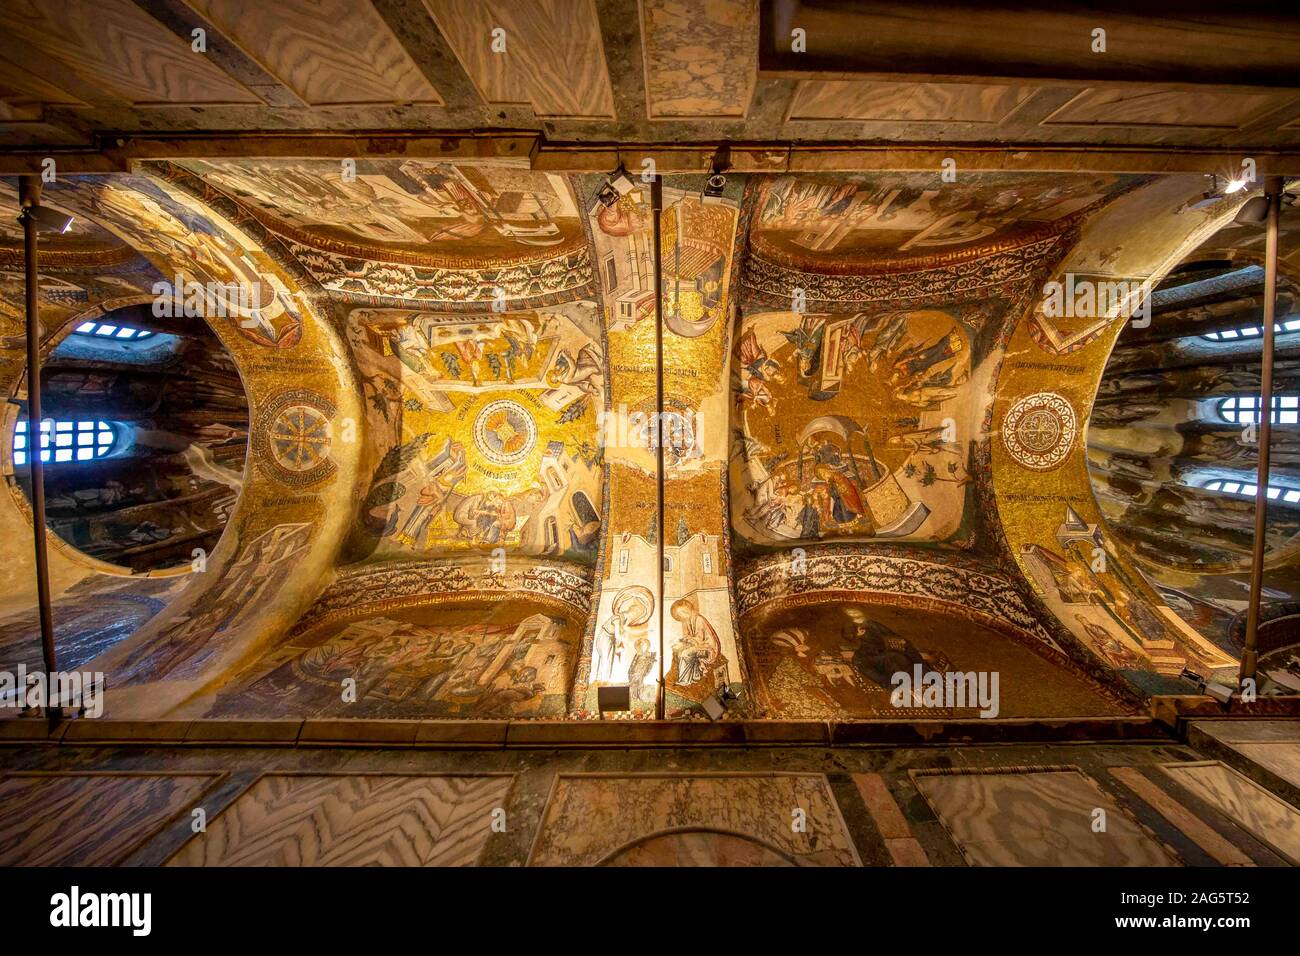 Istanbul, Turkey - Sep 19, 2015: Views from the frescoes and mosaics in Chora Church in ıstanbul on Sep 19, 2015 Stock Photo